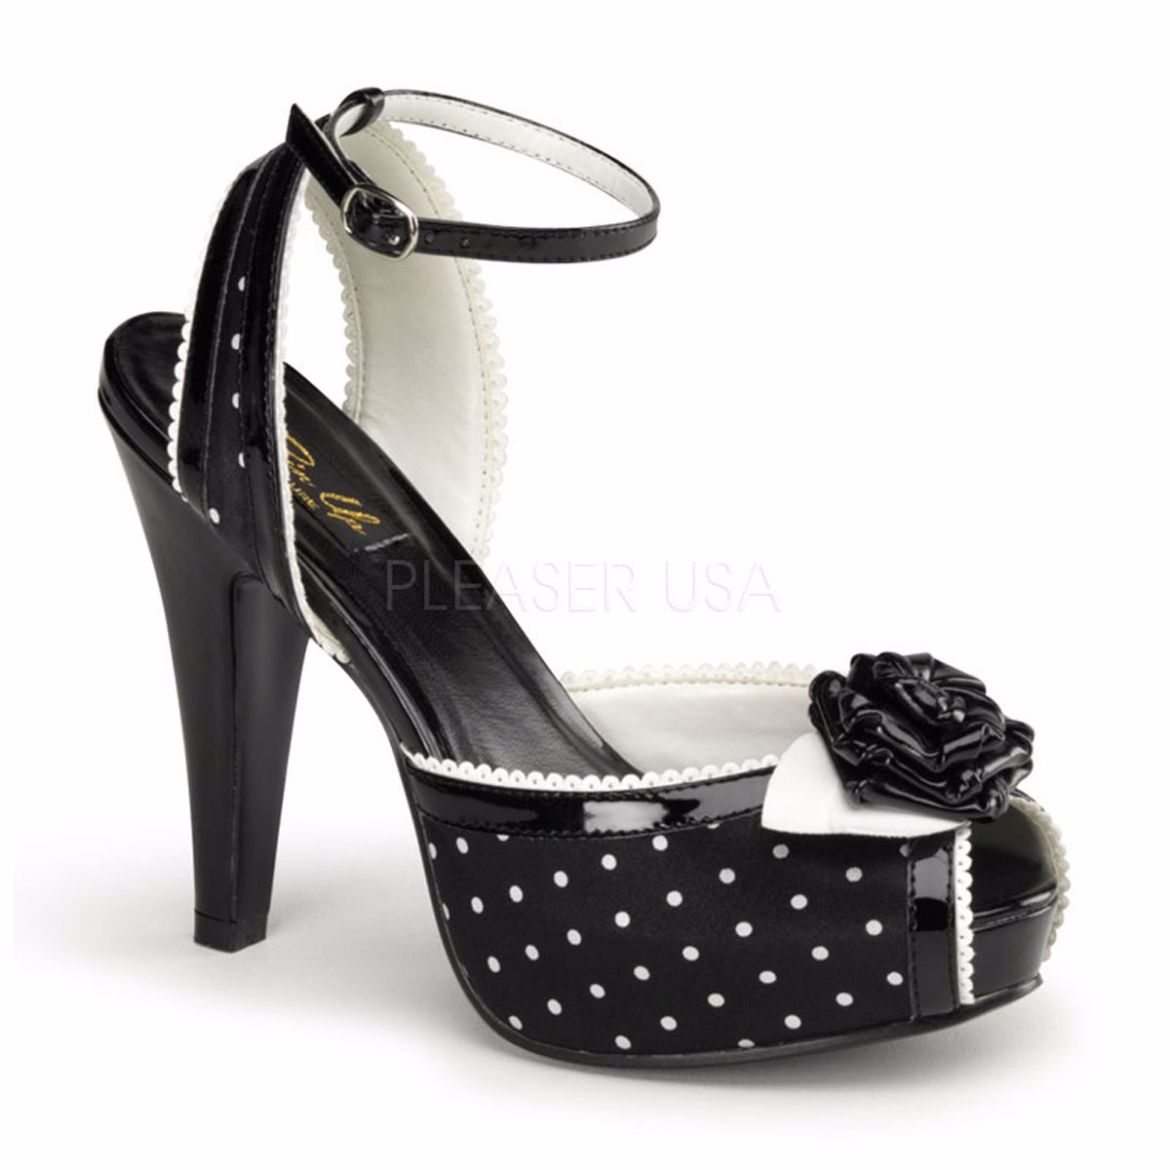 Product image of Pin Up Couture BETTIE-06 Black Satin (Polka Polka Dots Print Print) 4 1/2 inch (11.4 cm) Heel 1 inch (2.5 cm) Hidden Platform Peep Toe Ankle Strap Sandal Shoes